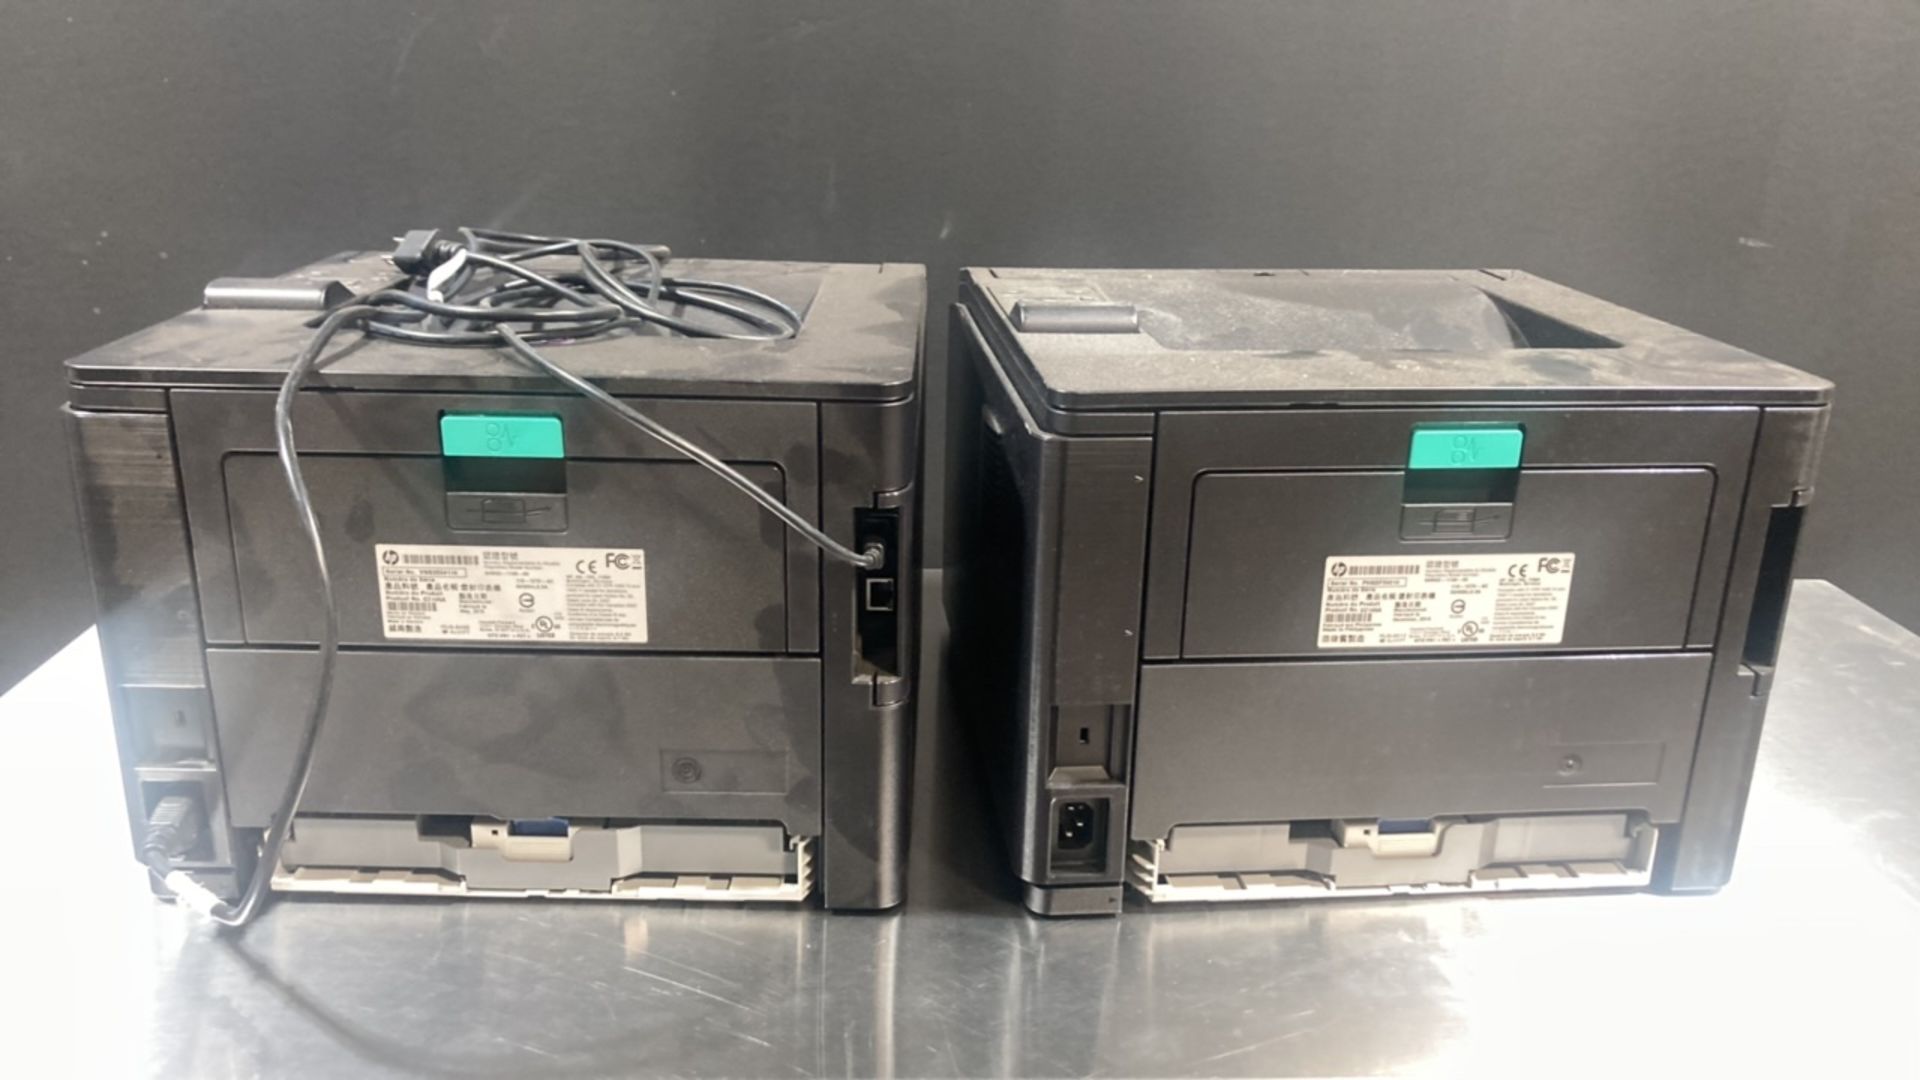 LOT OF 2 HP M401M PRINTERS LOCATED AT: 2440 GREENLEAF AVE, ELK GROVE VILLAGE IL - Image 2 of 2